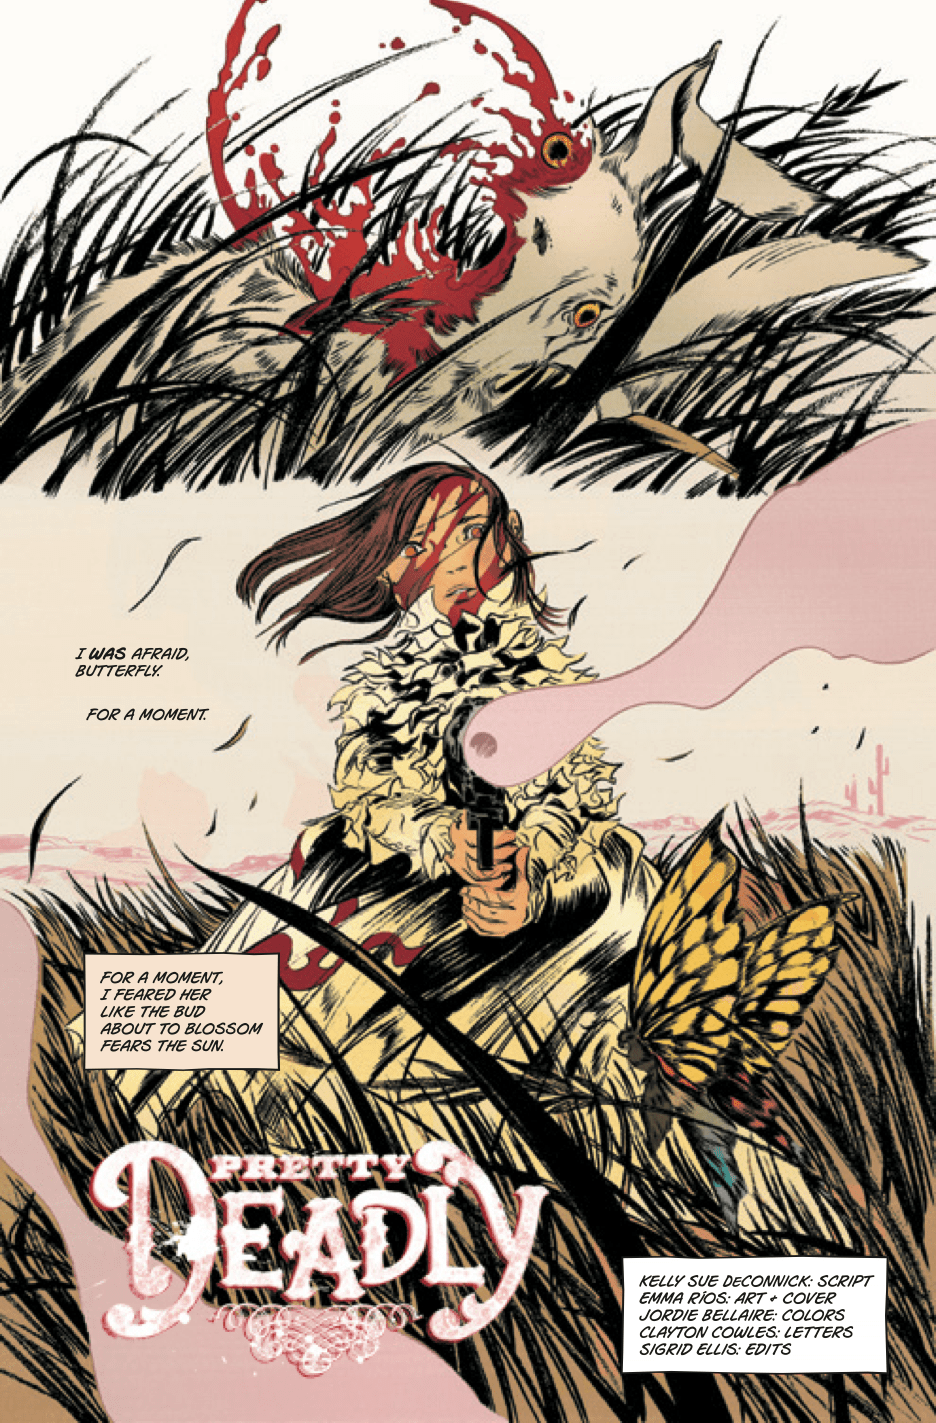 The Great New Comic You Should Buy Tomorrow Is ‘Pretty Deadly’